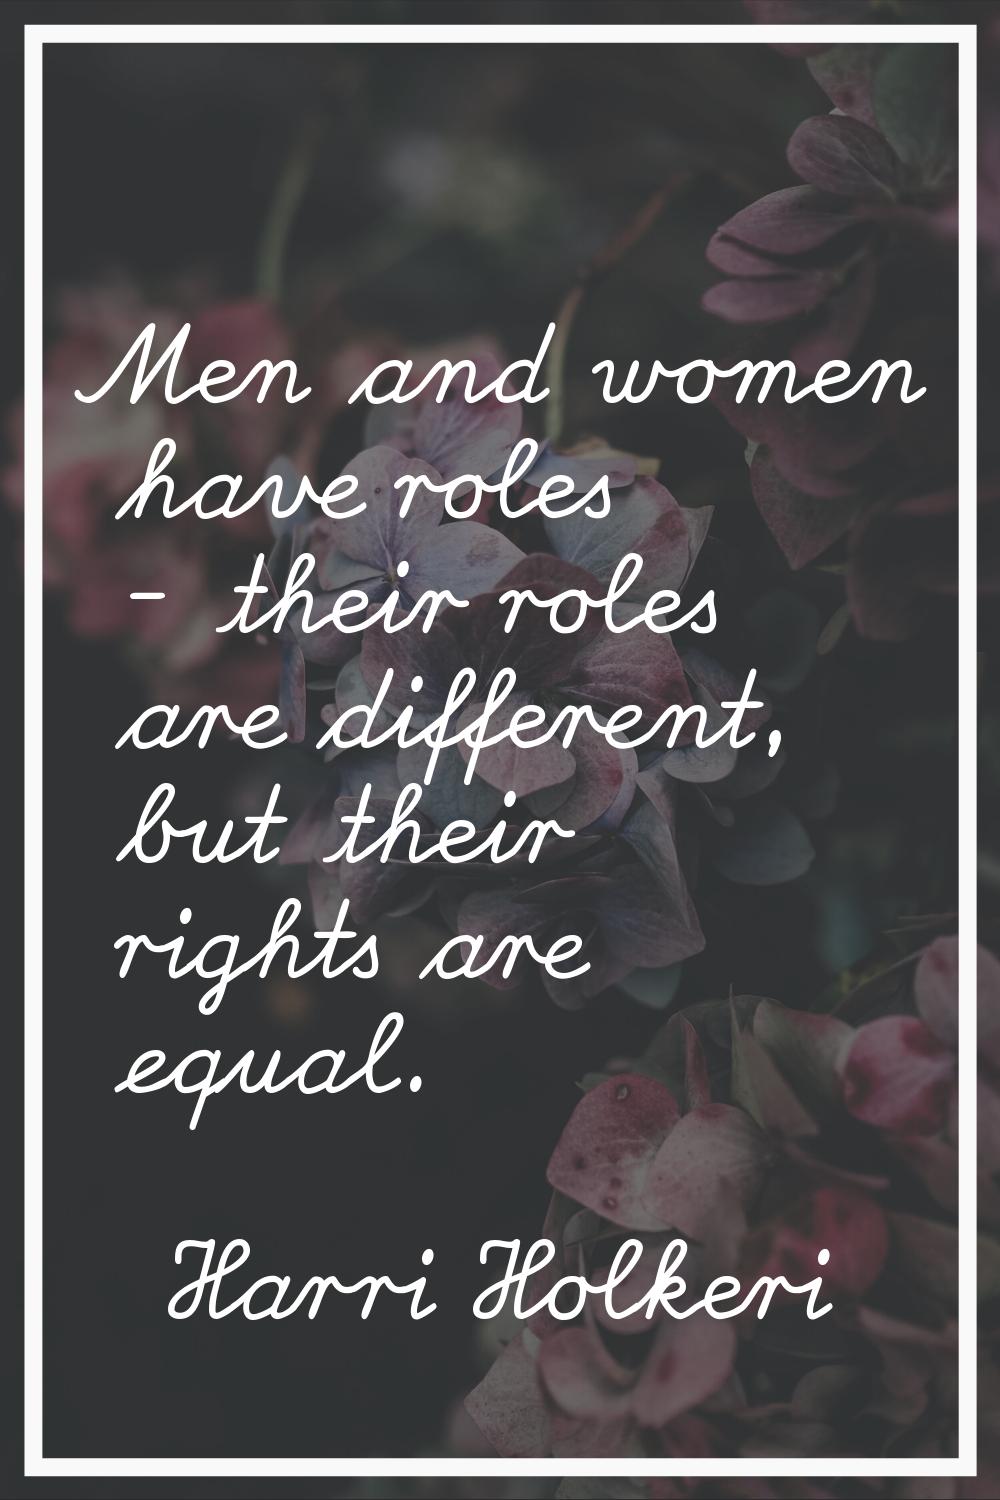 Men and women have roles - their roles are different, but their rights are equal.